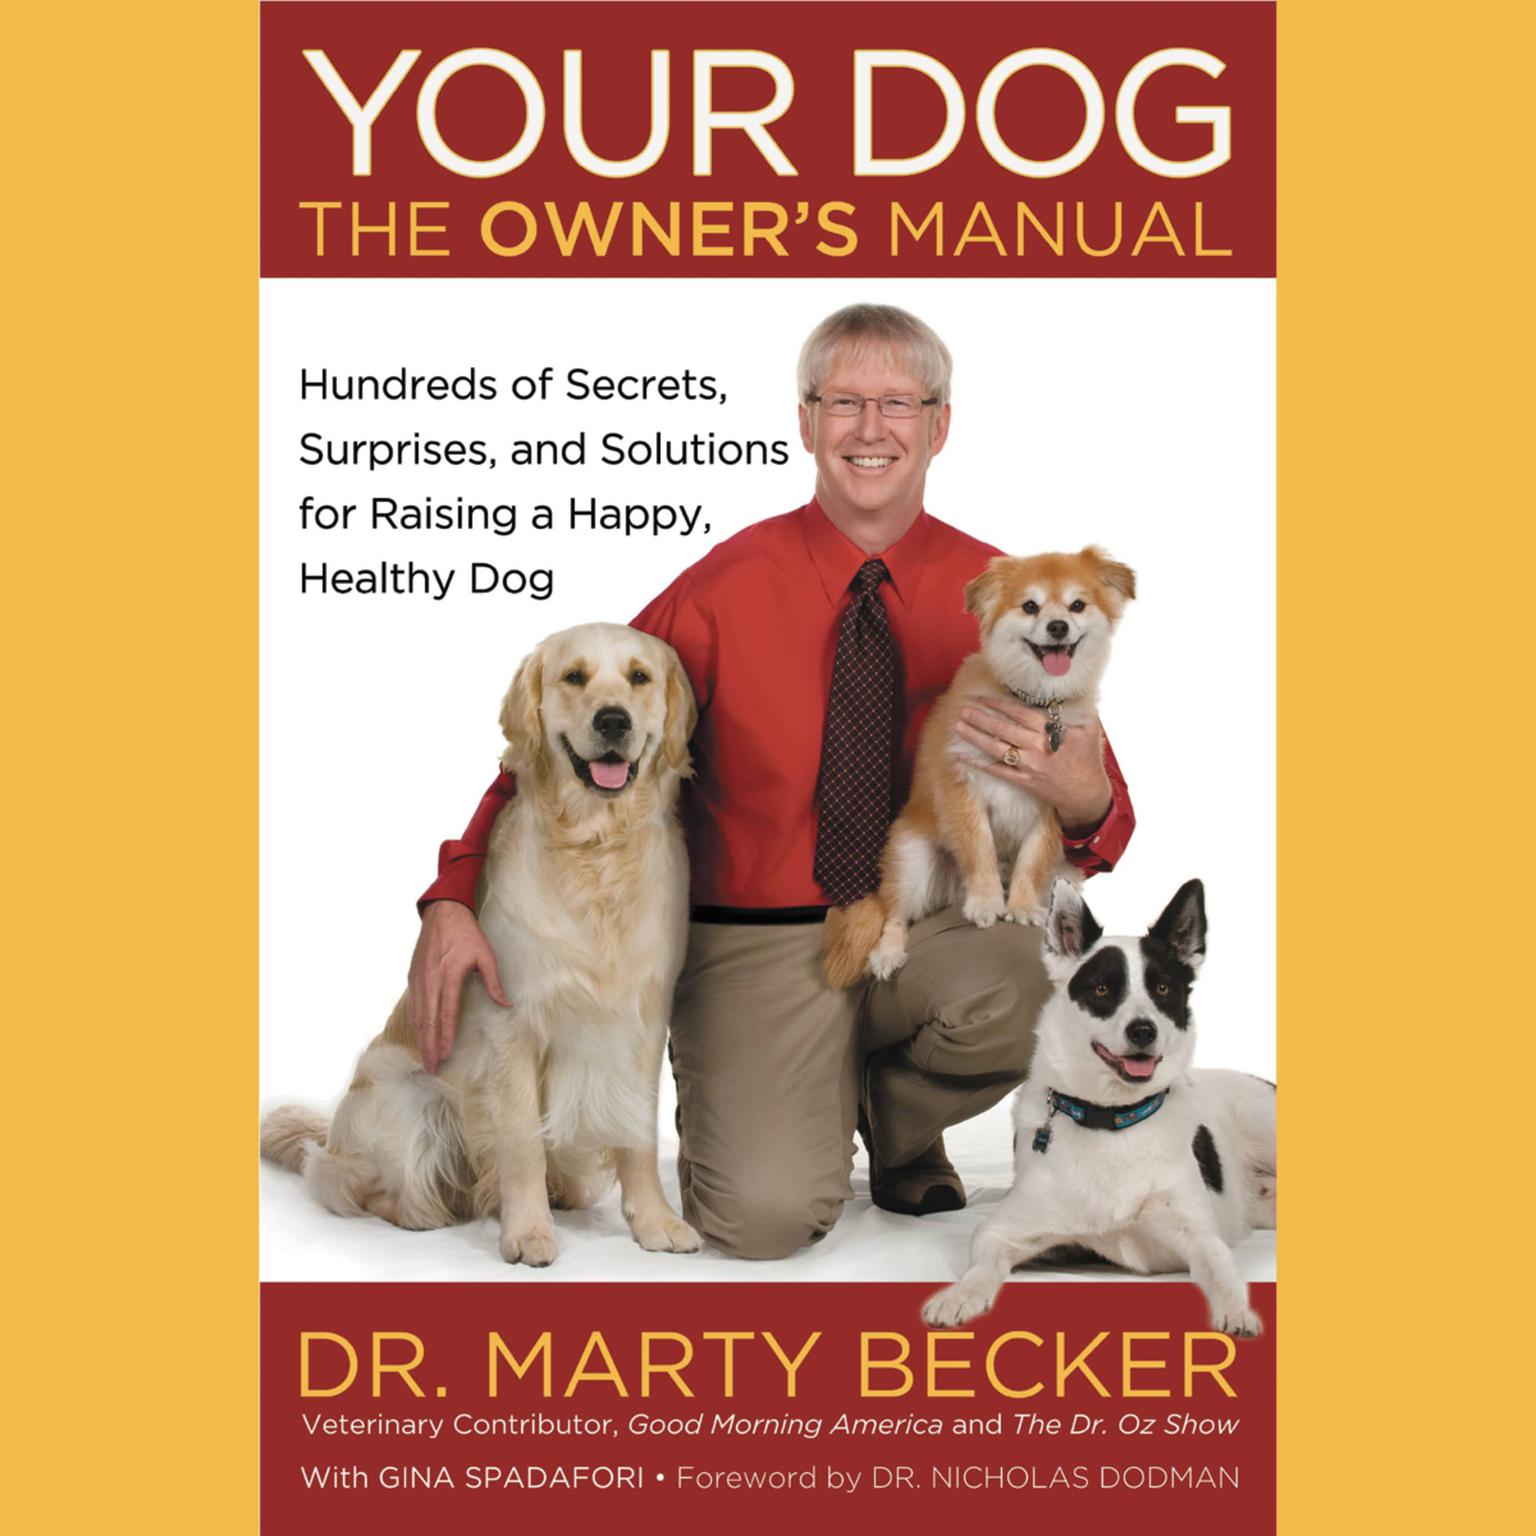 Your Dog: The Owners Manual: Hundreds of Secrets, Surprises, and Solutions for Raising a Happy, Healthy Dog Audiobook, by Marty Becker